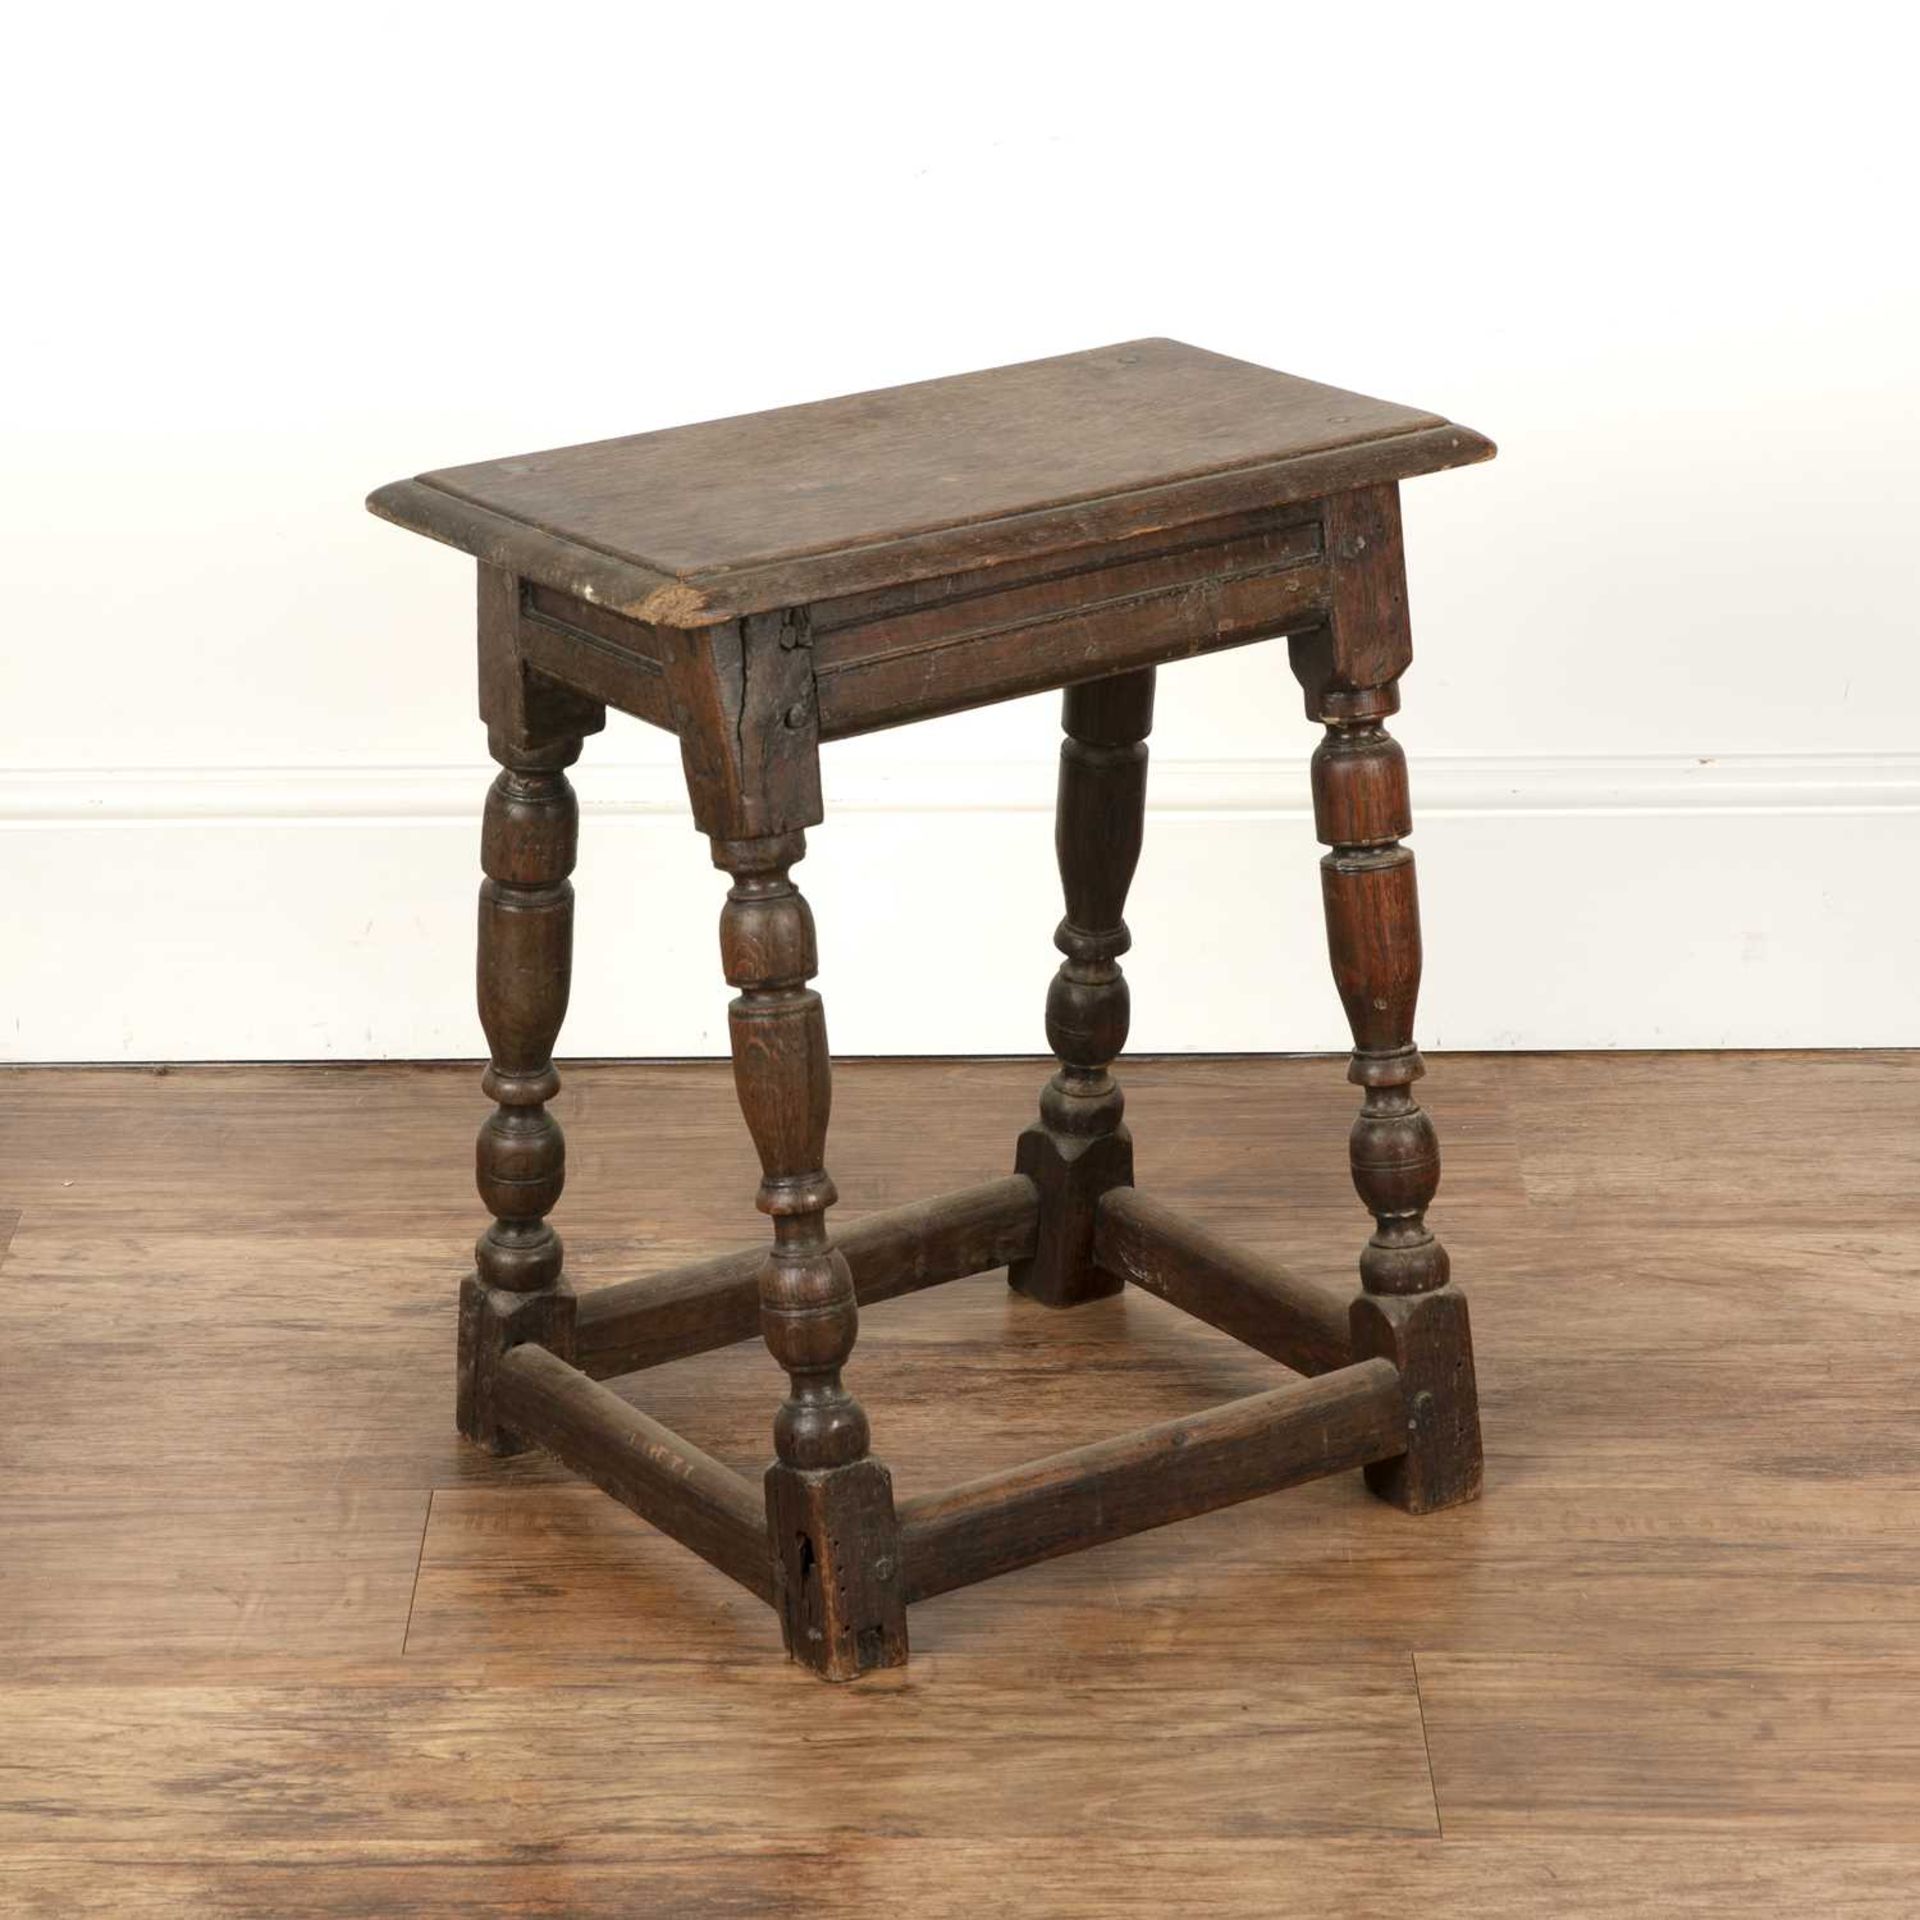 Oak joint stool with turned supports and stretchers, 45cm wide x 25cm deep x 52cm high